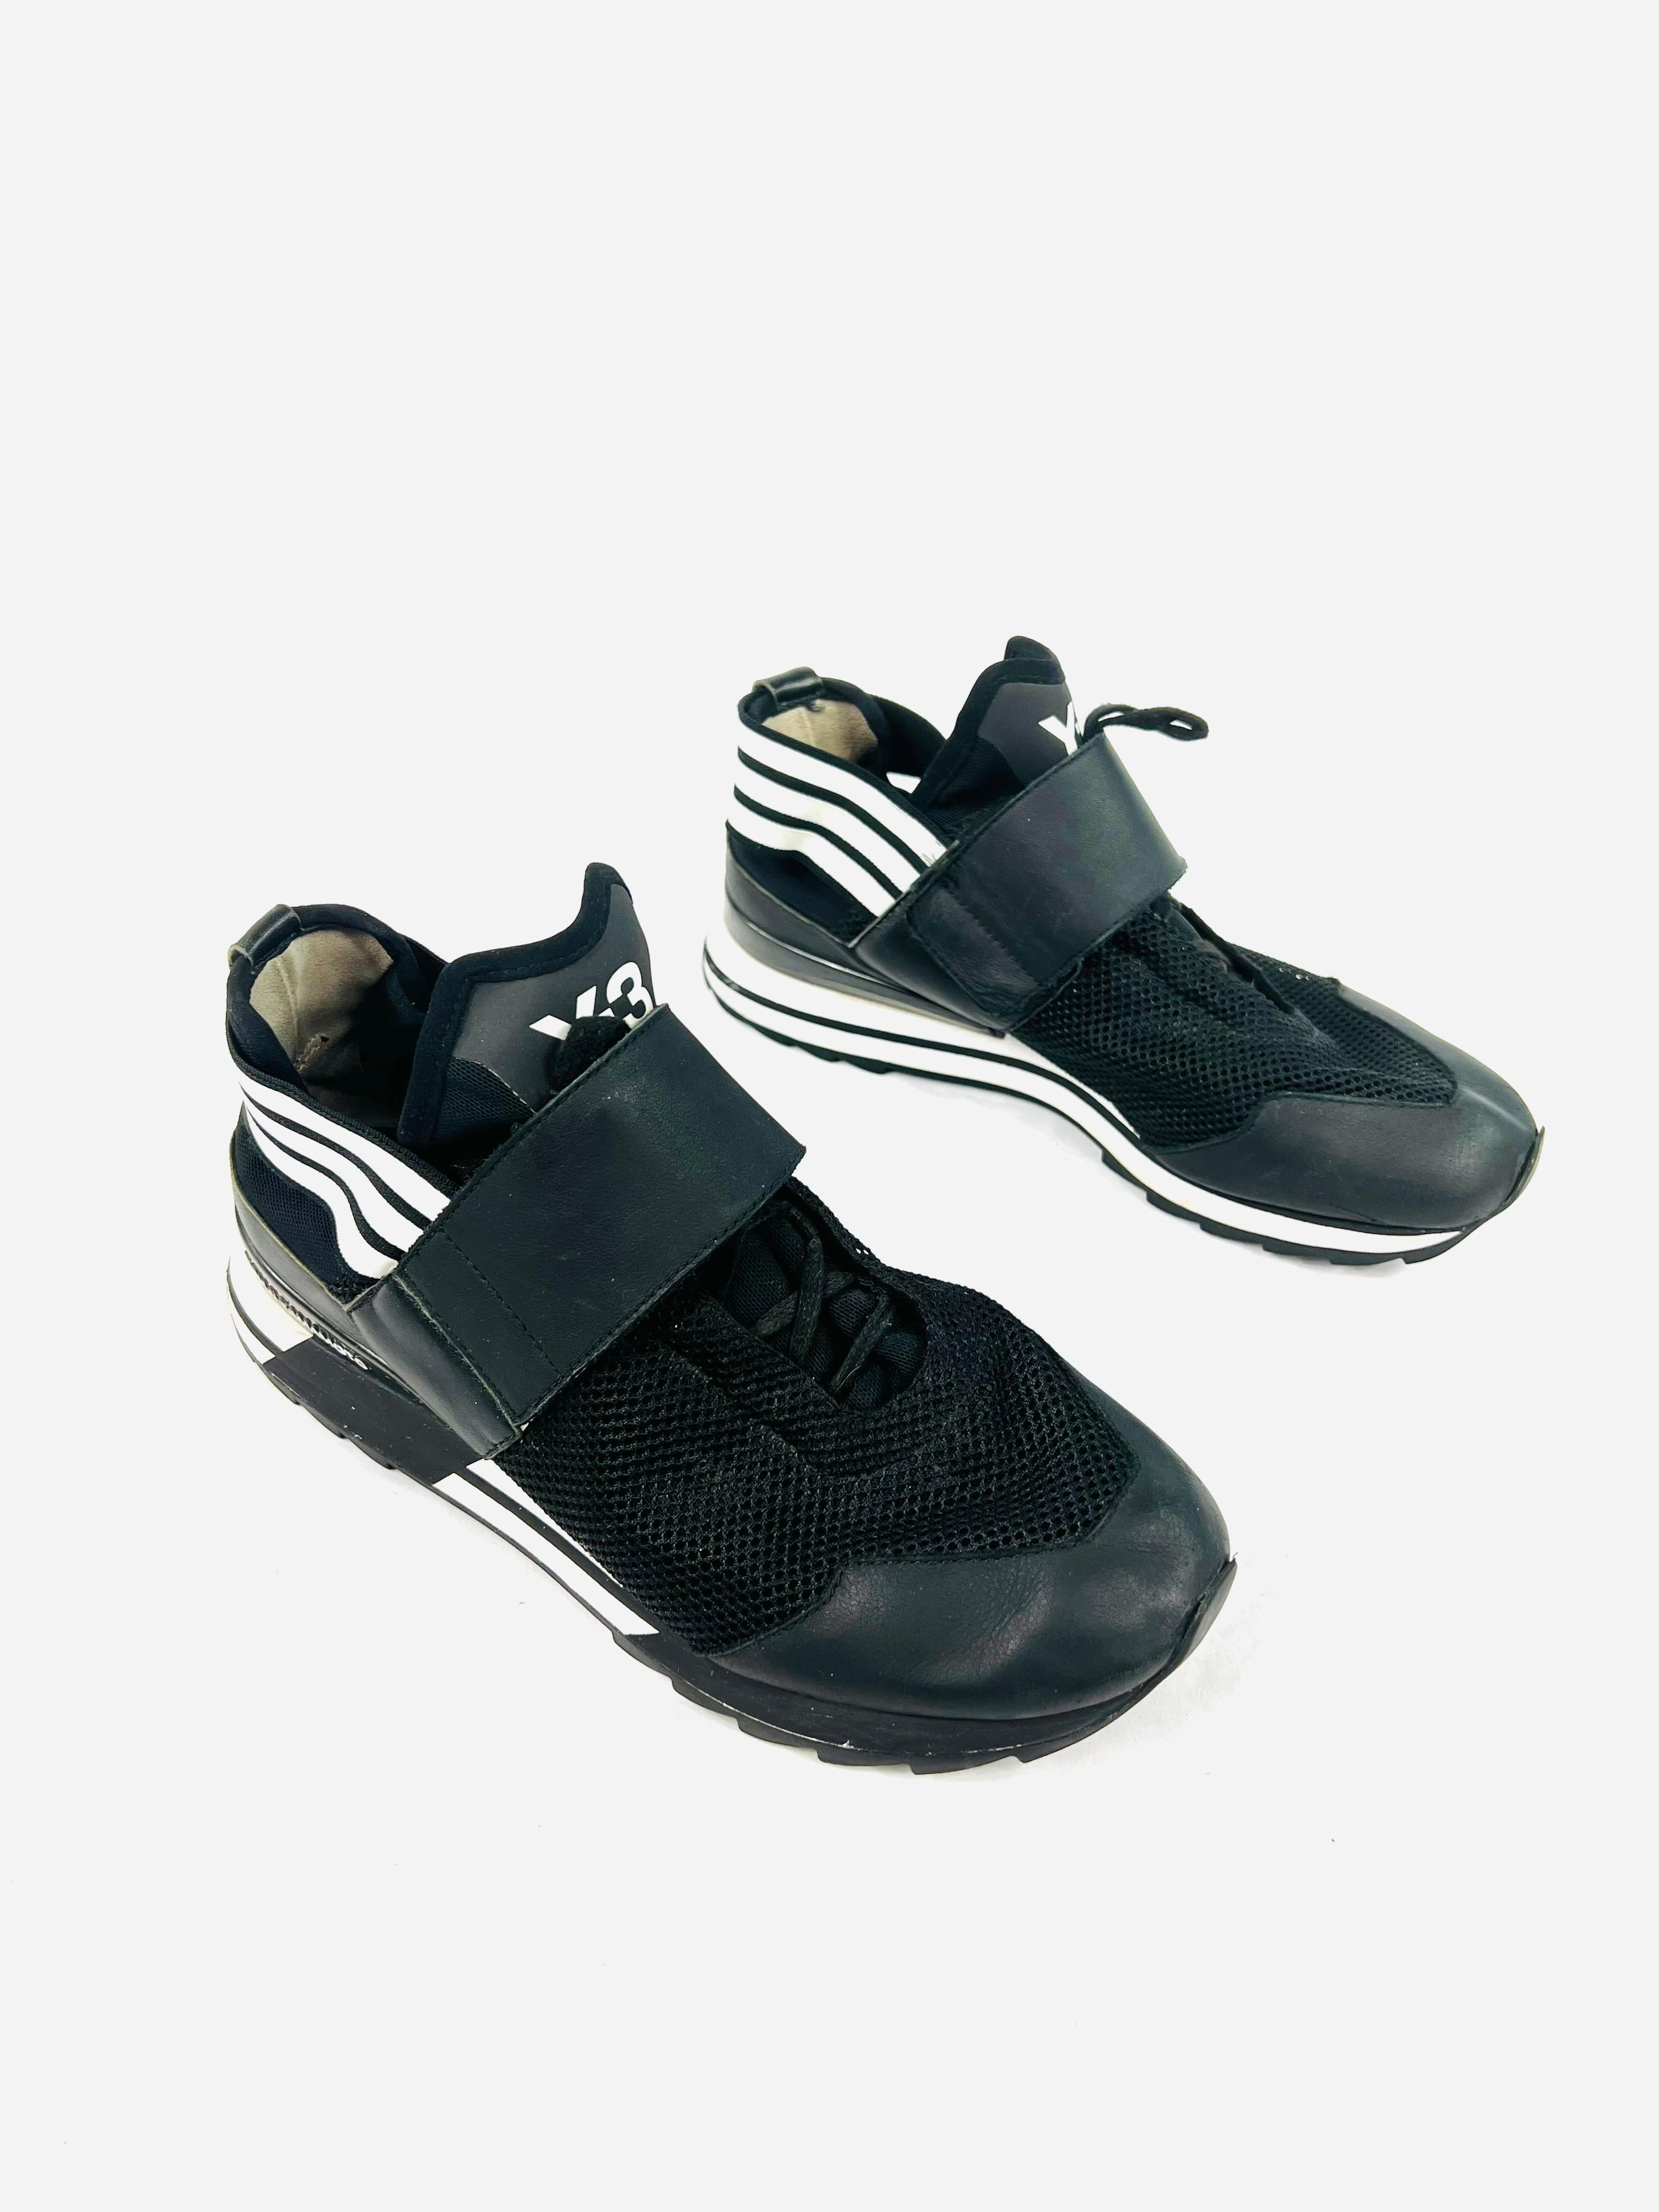 Y-3 Rhita Sport Black and White Sneakers, Size 38 In Excellent Condition For Sale In Beverly Hills, CA